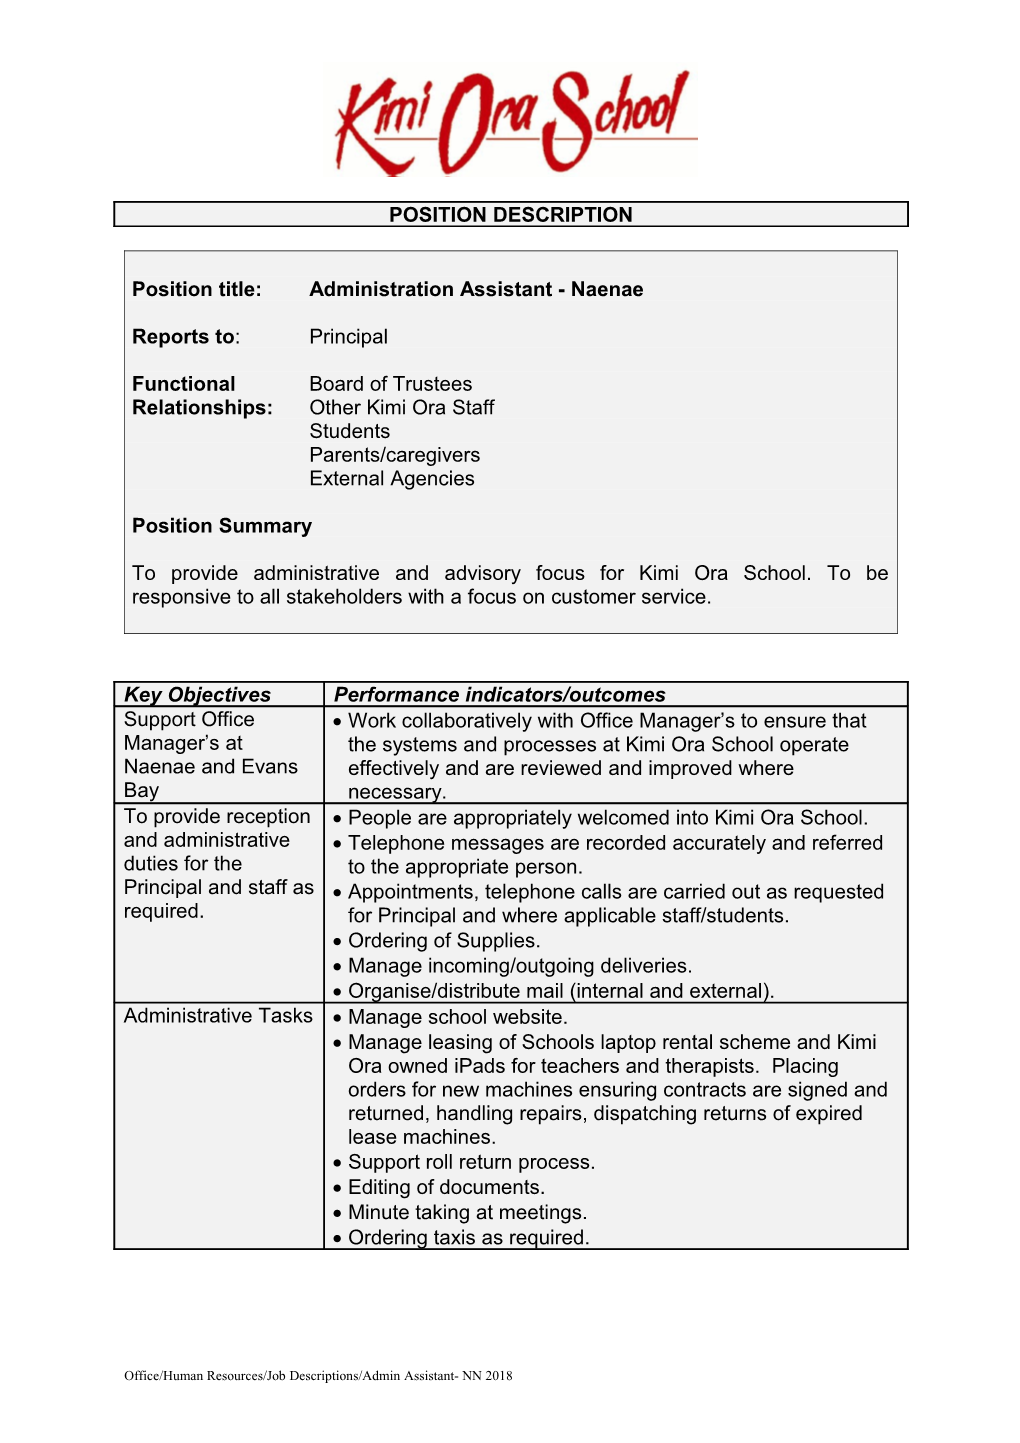 Position Title: Administration Assistant - Naenae